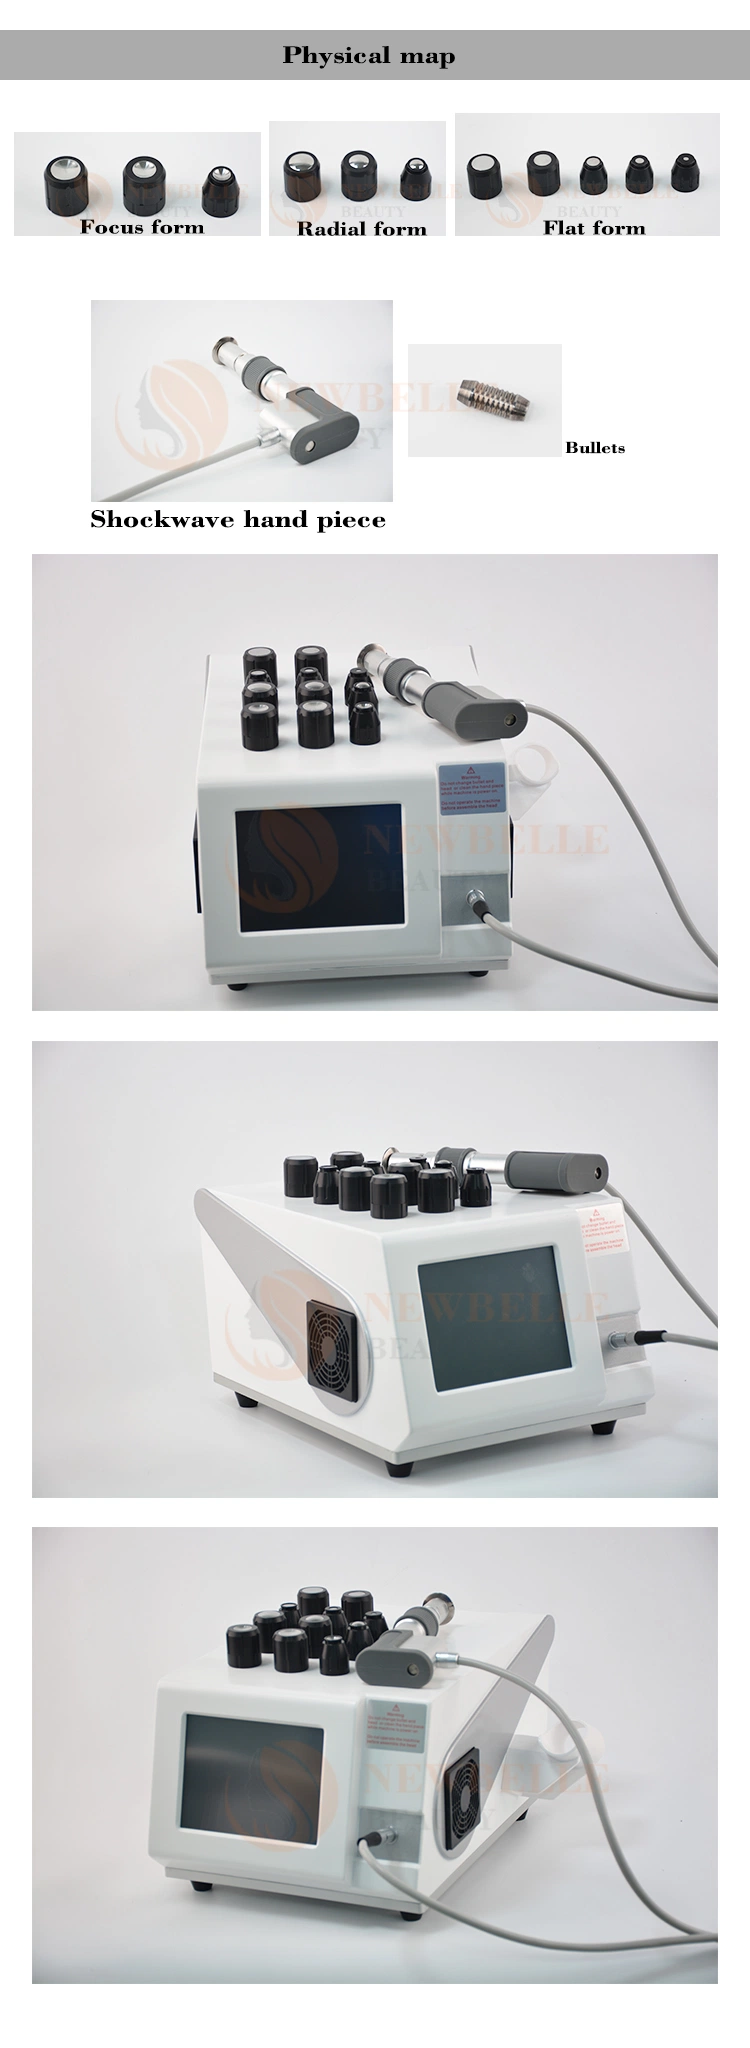 High Quality Portable Air Pressure Shock Wave Therapy Machine Physiotherapy Massage Machine